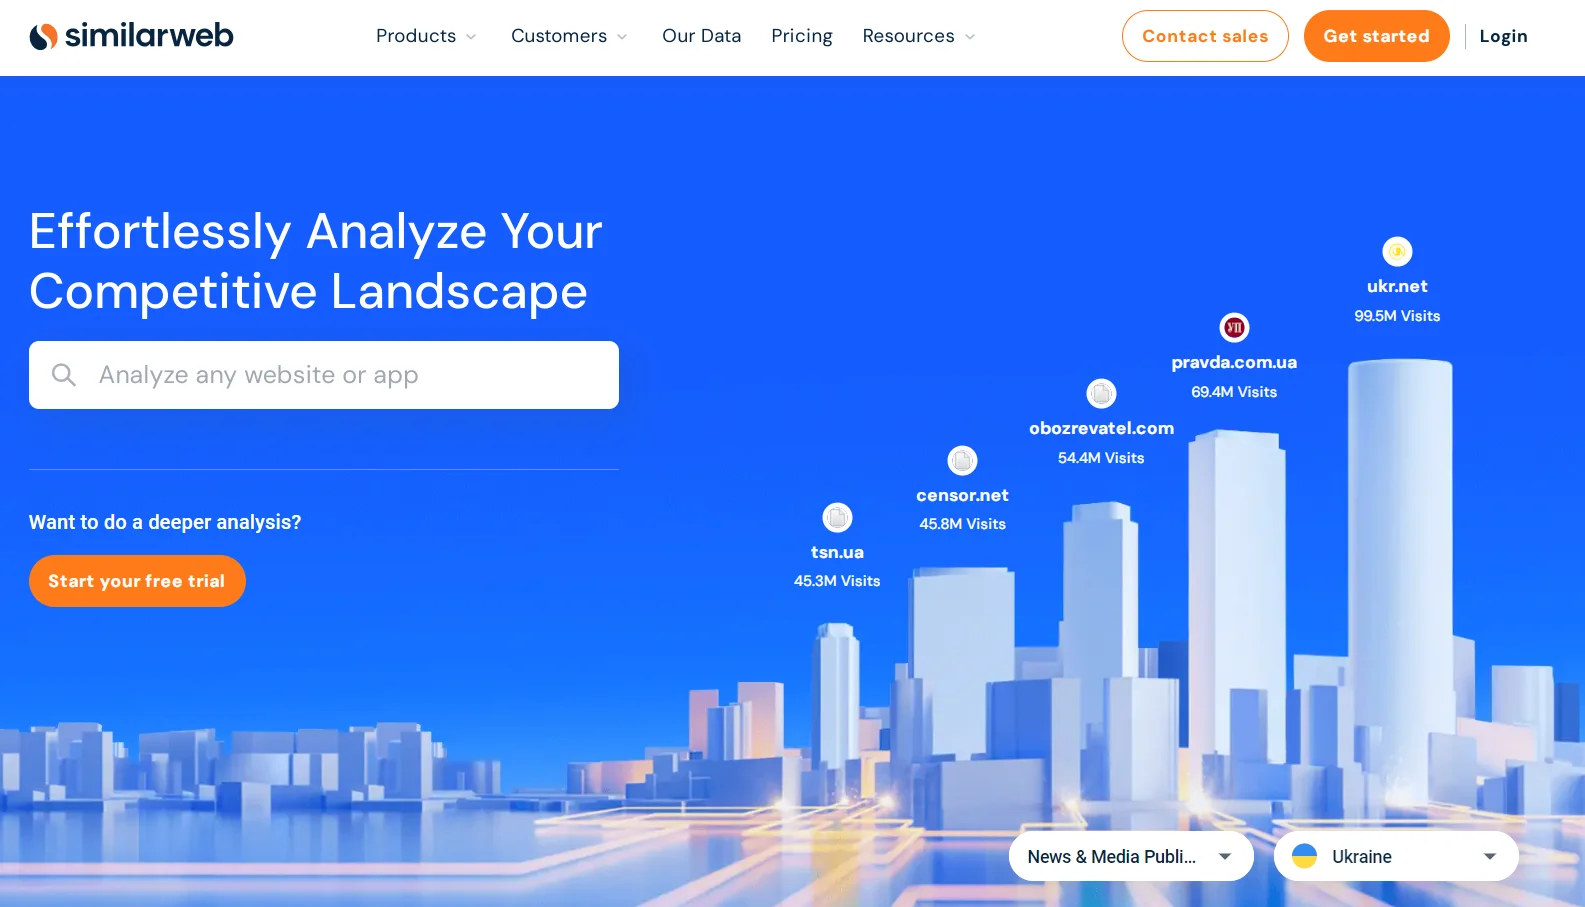 Home page of the traffic analysis service SimilarWeb